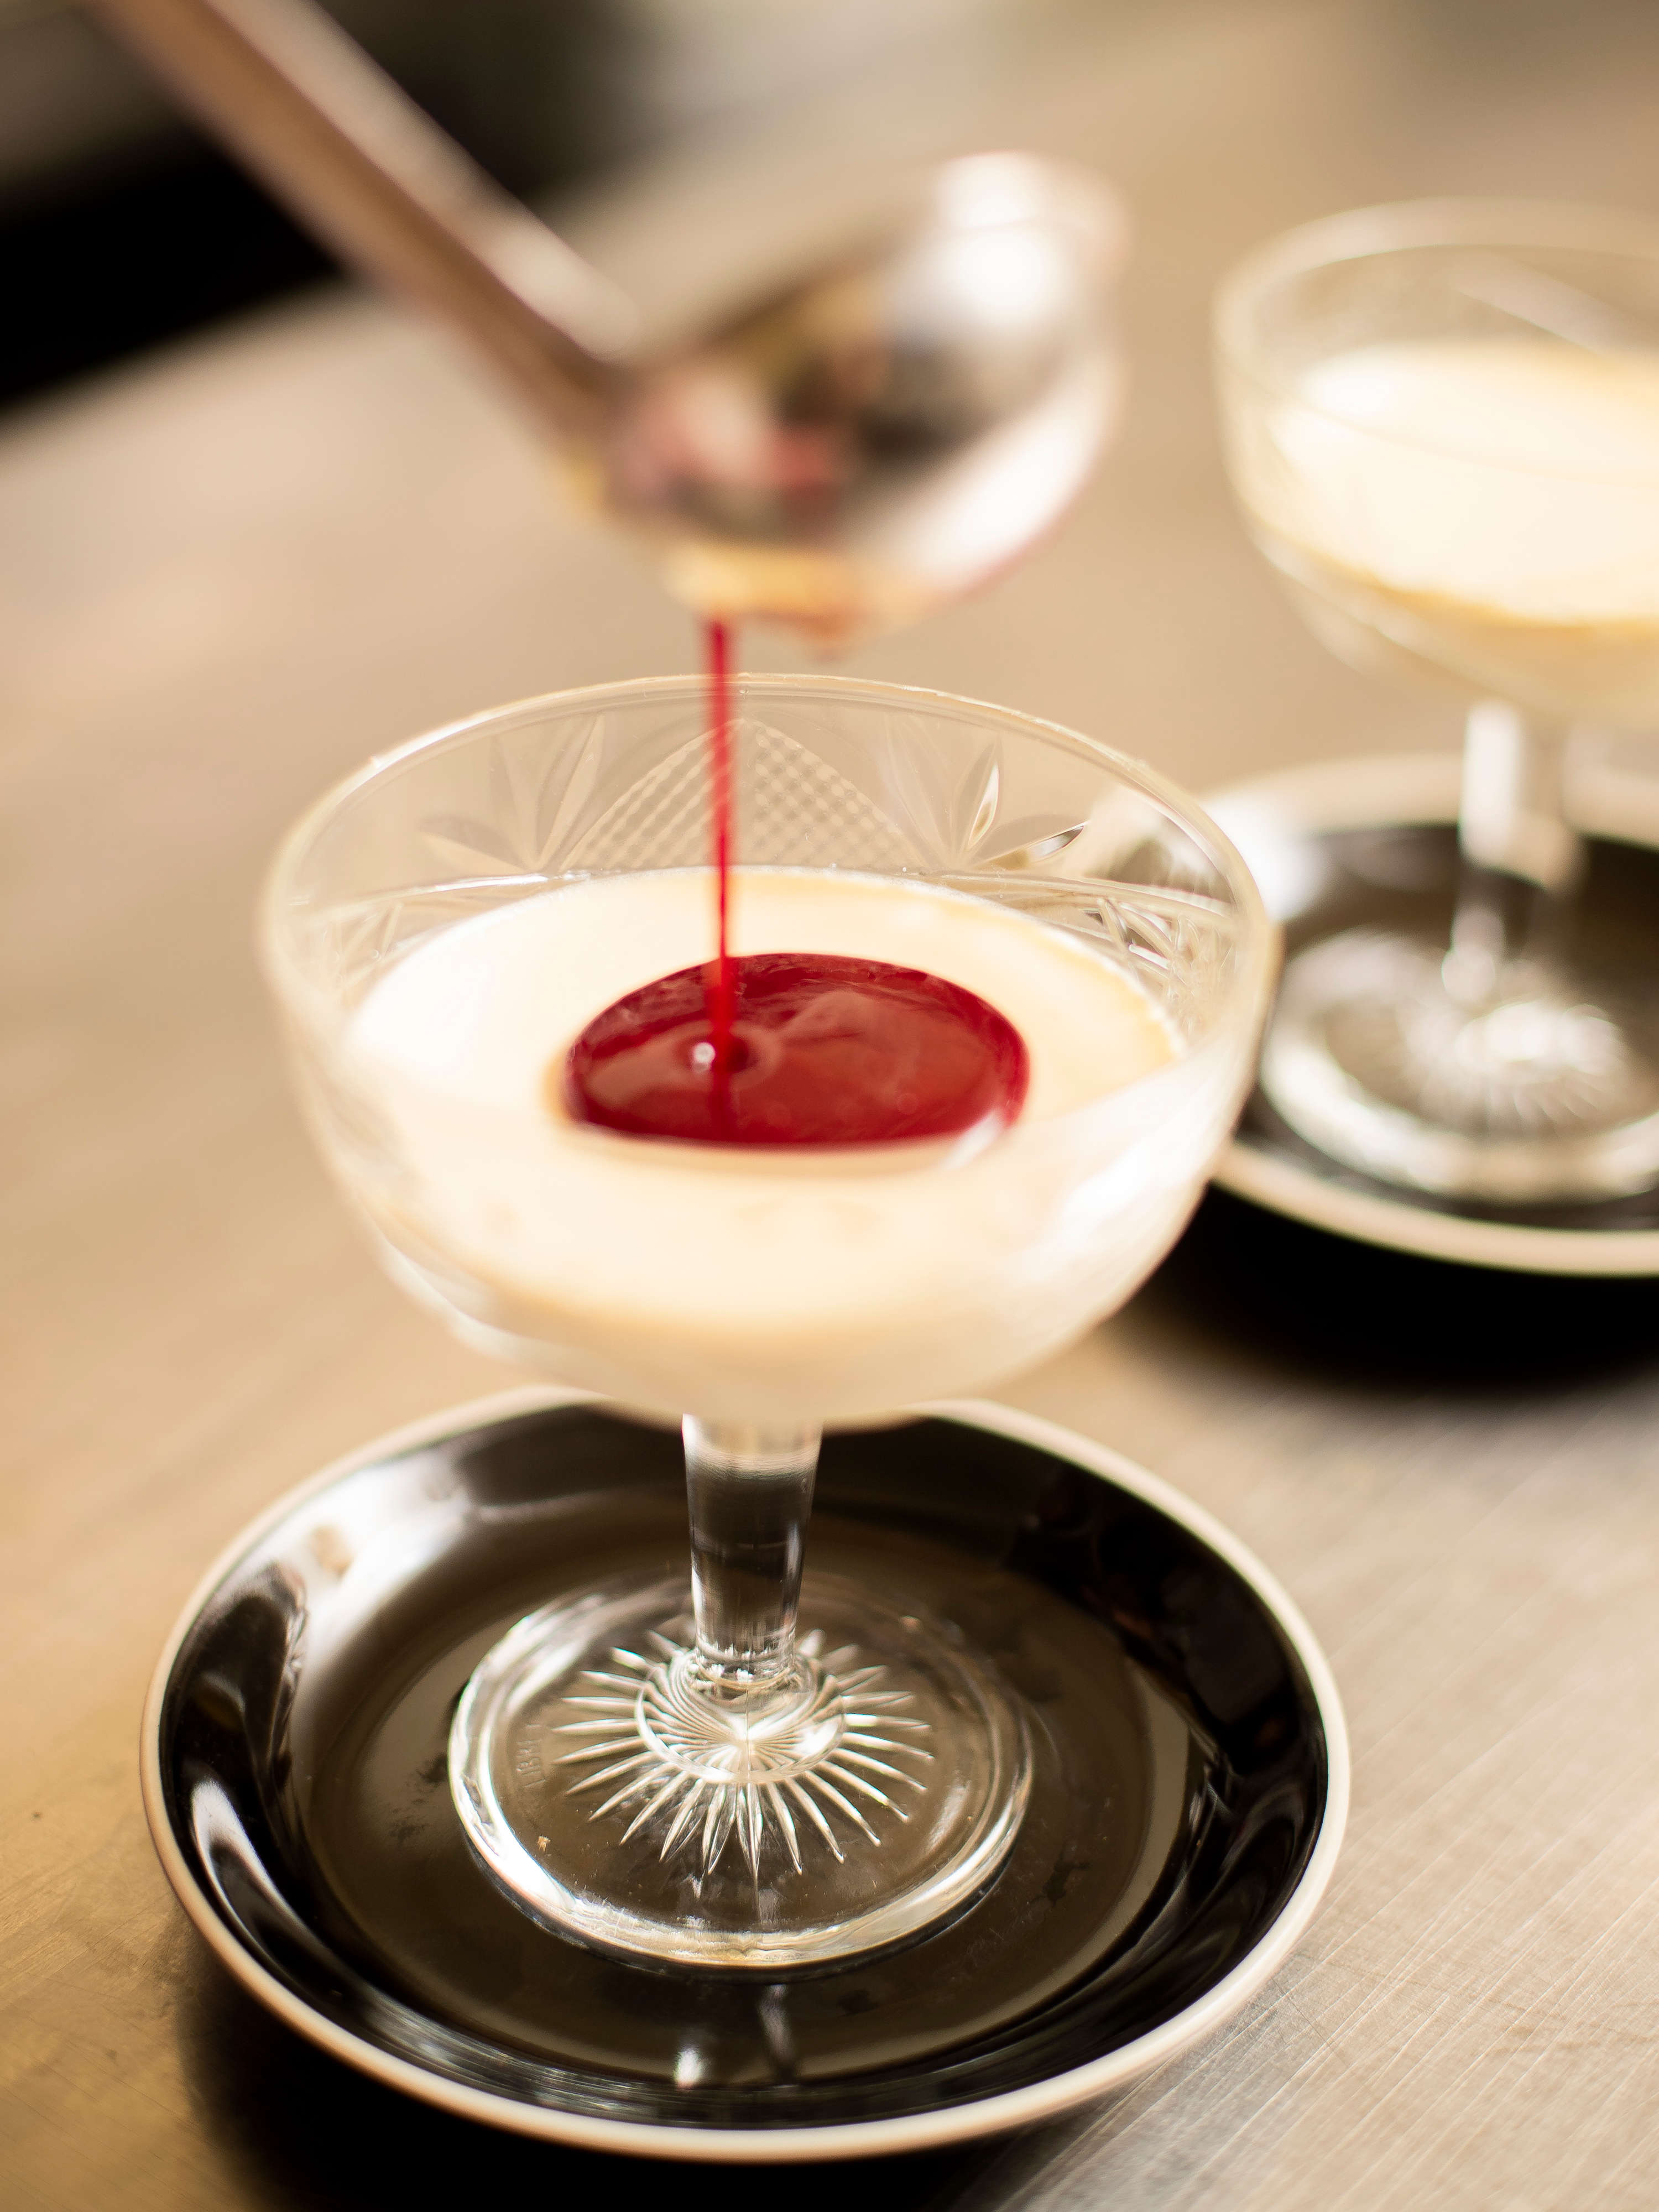 Vanilla panna cotta with raspberry coulis being drizzled on top. Photo: Richard Jupe.